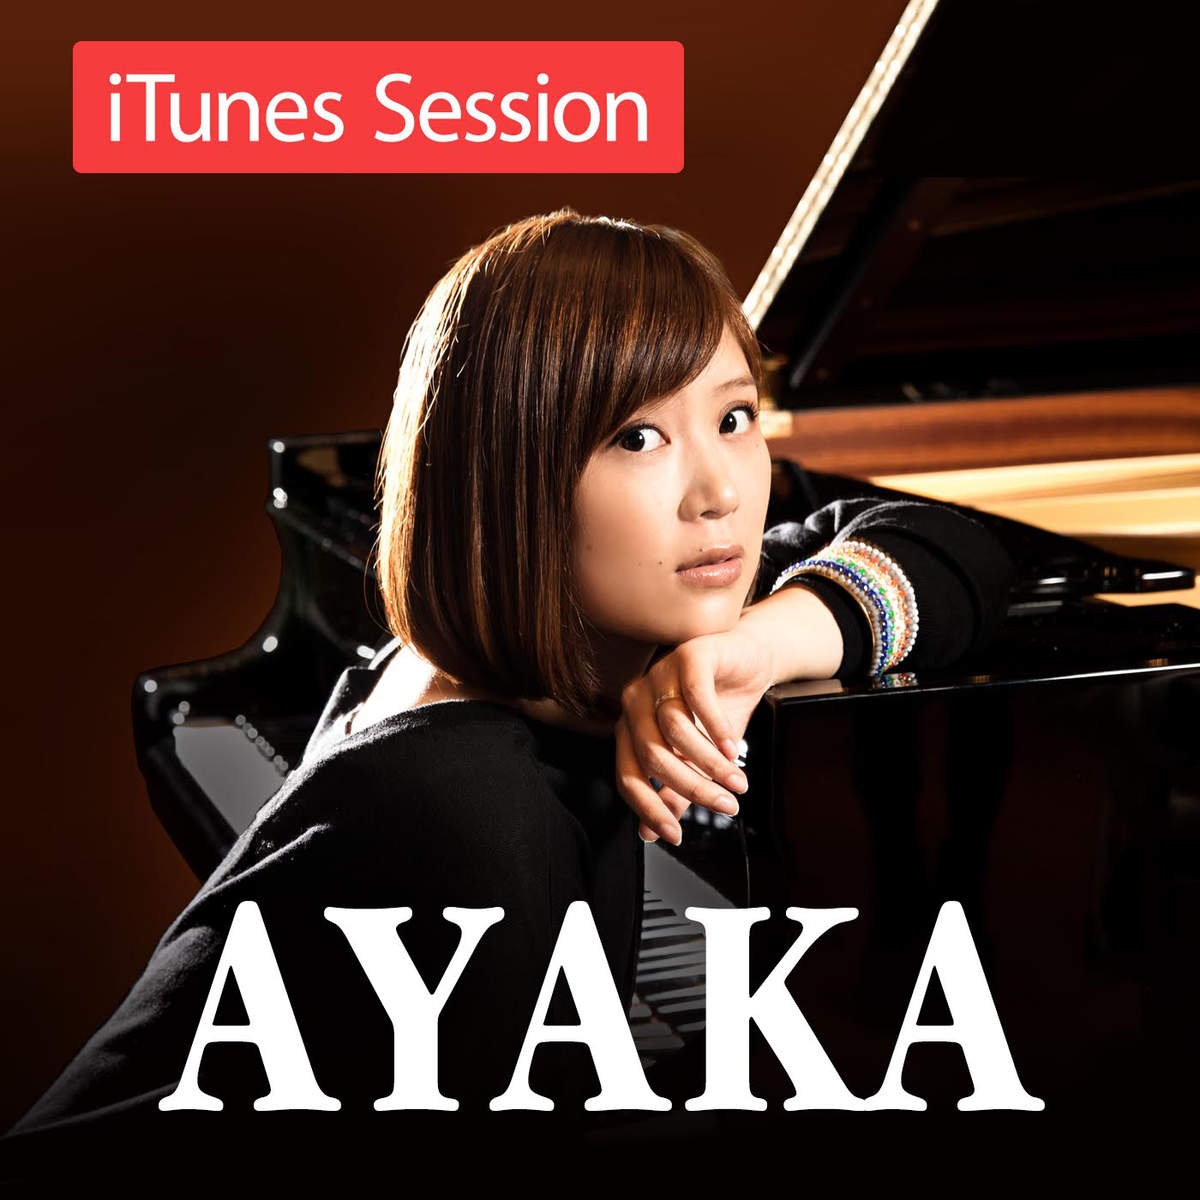 xiang iTunes Session